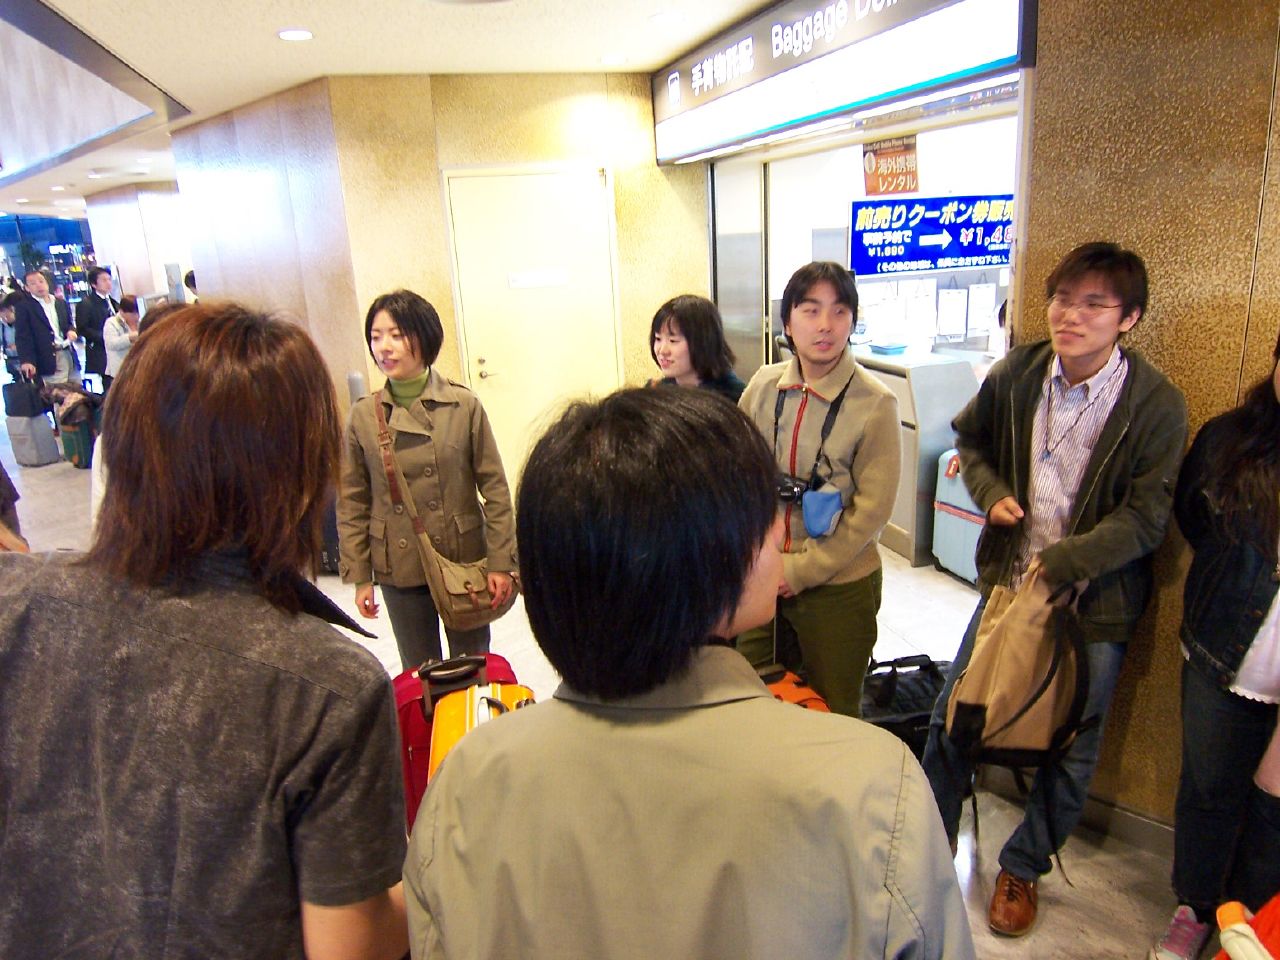 several people in a line in an elevator